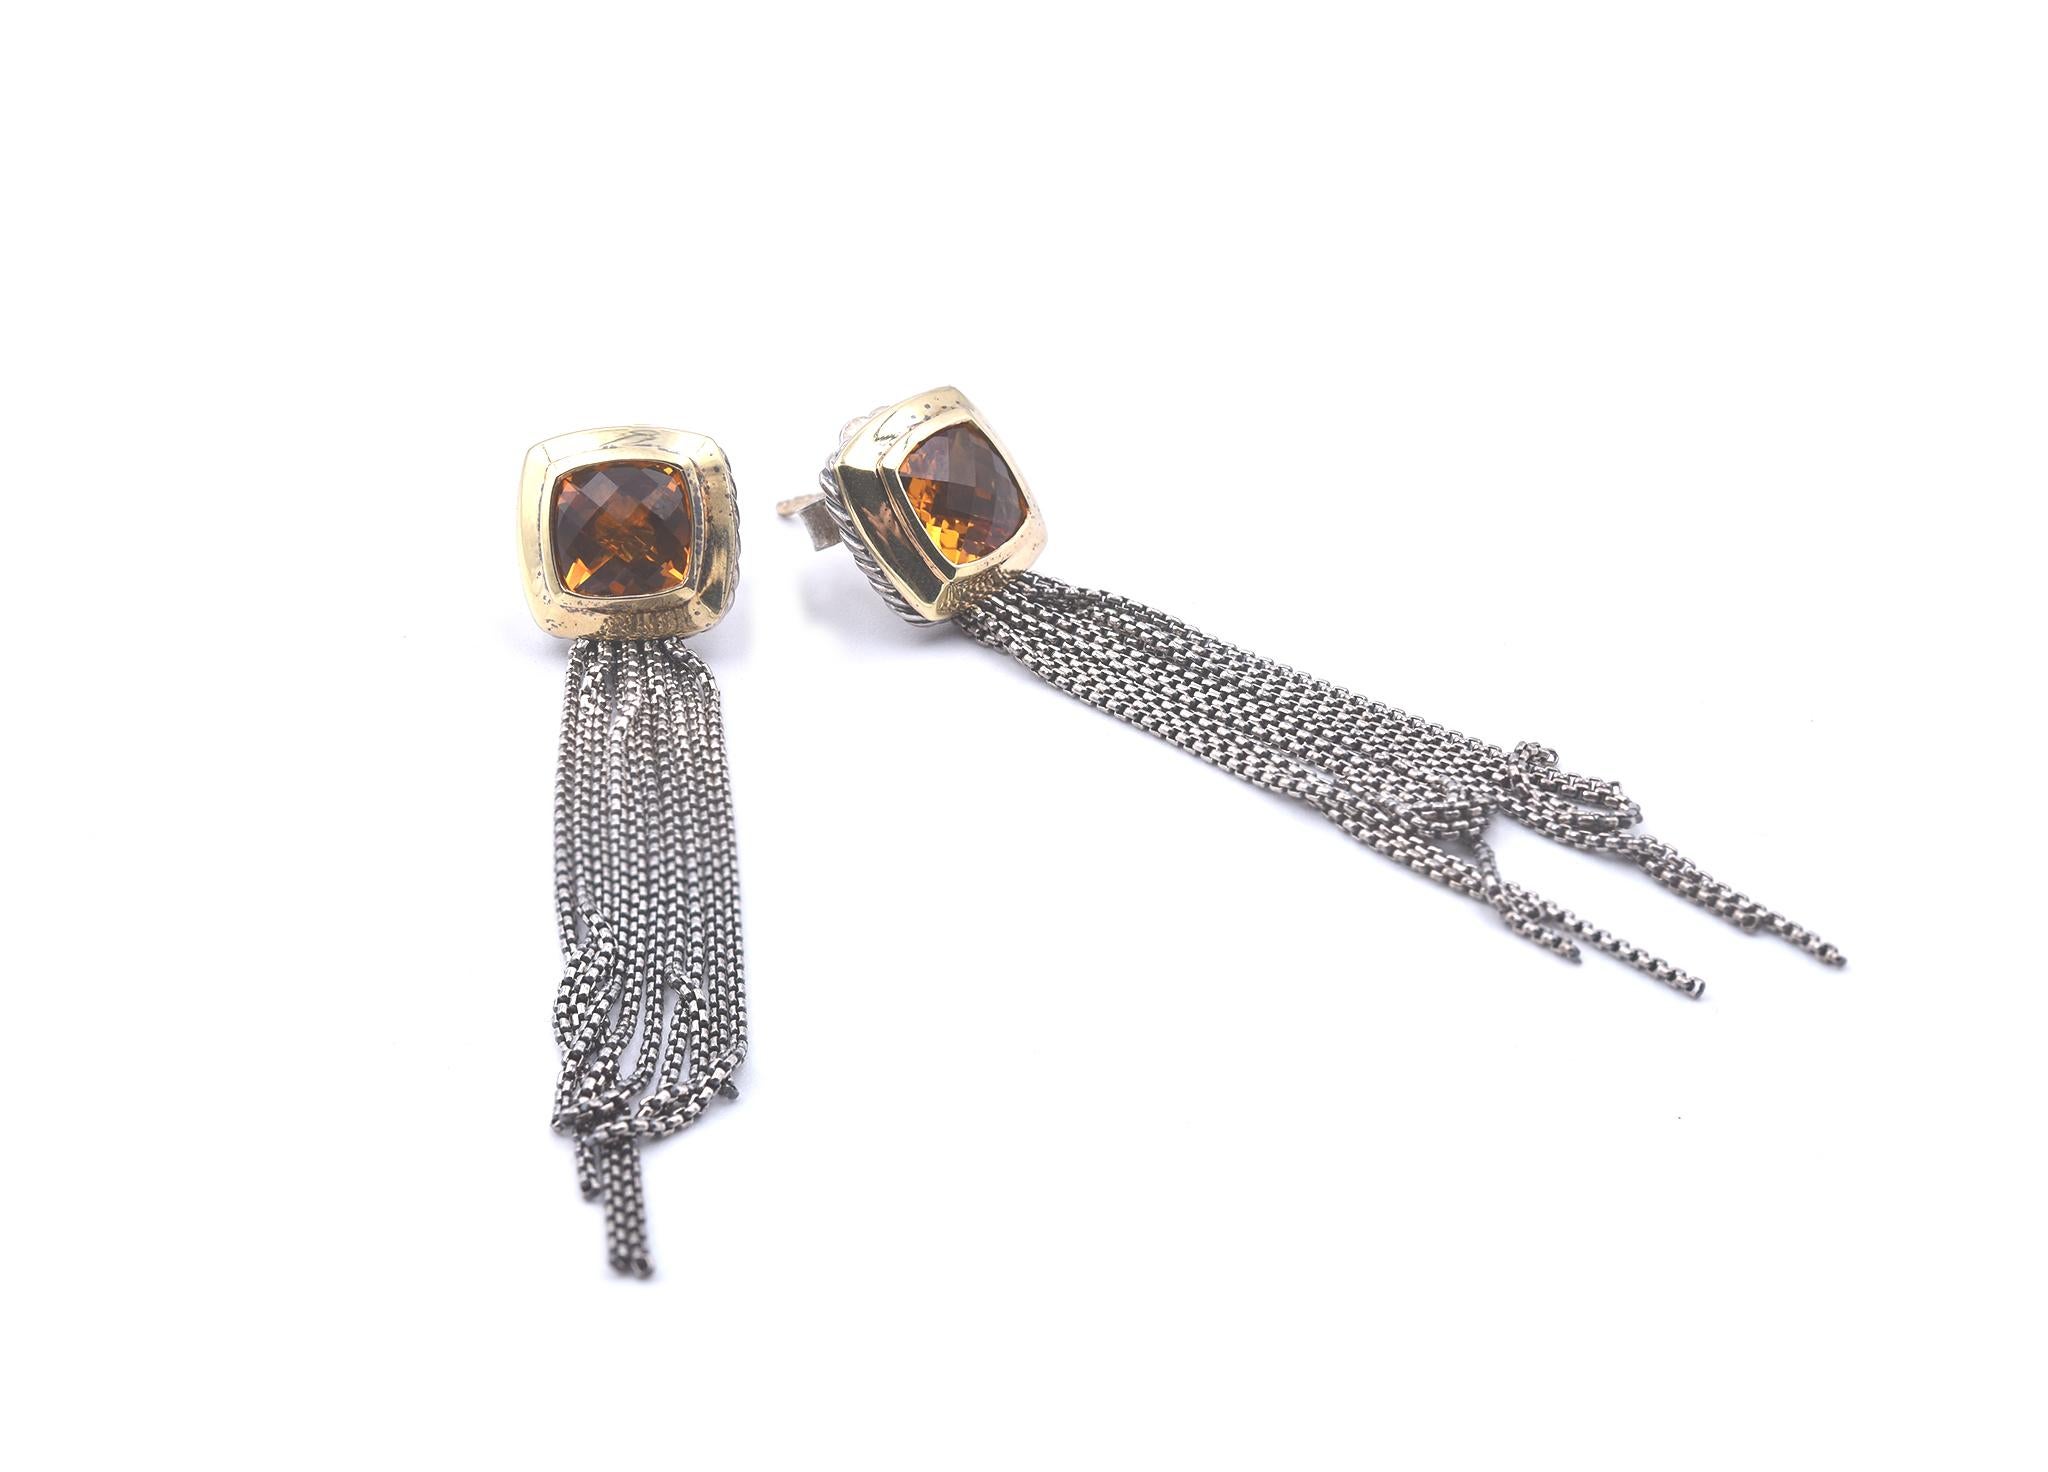 Designer: David Yurman 
Material: Sterling silver and 18k yellow gold
Citrine: checkerboard cushion cut citrines
Dimensions: earrings measure 60mm in length and 11.55mm in width
Weight: 9.83 grams
